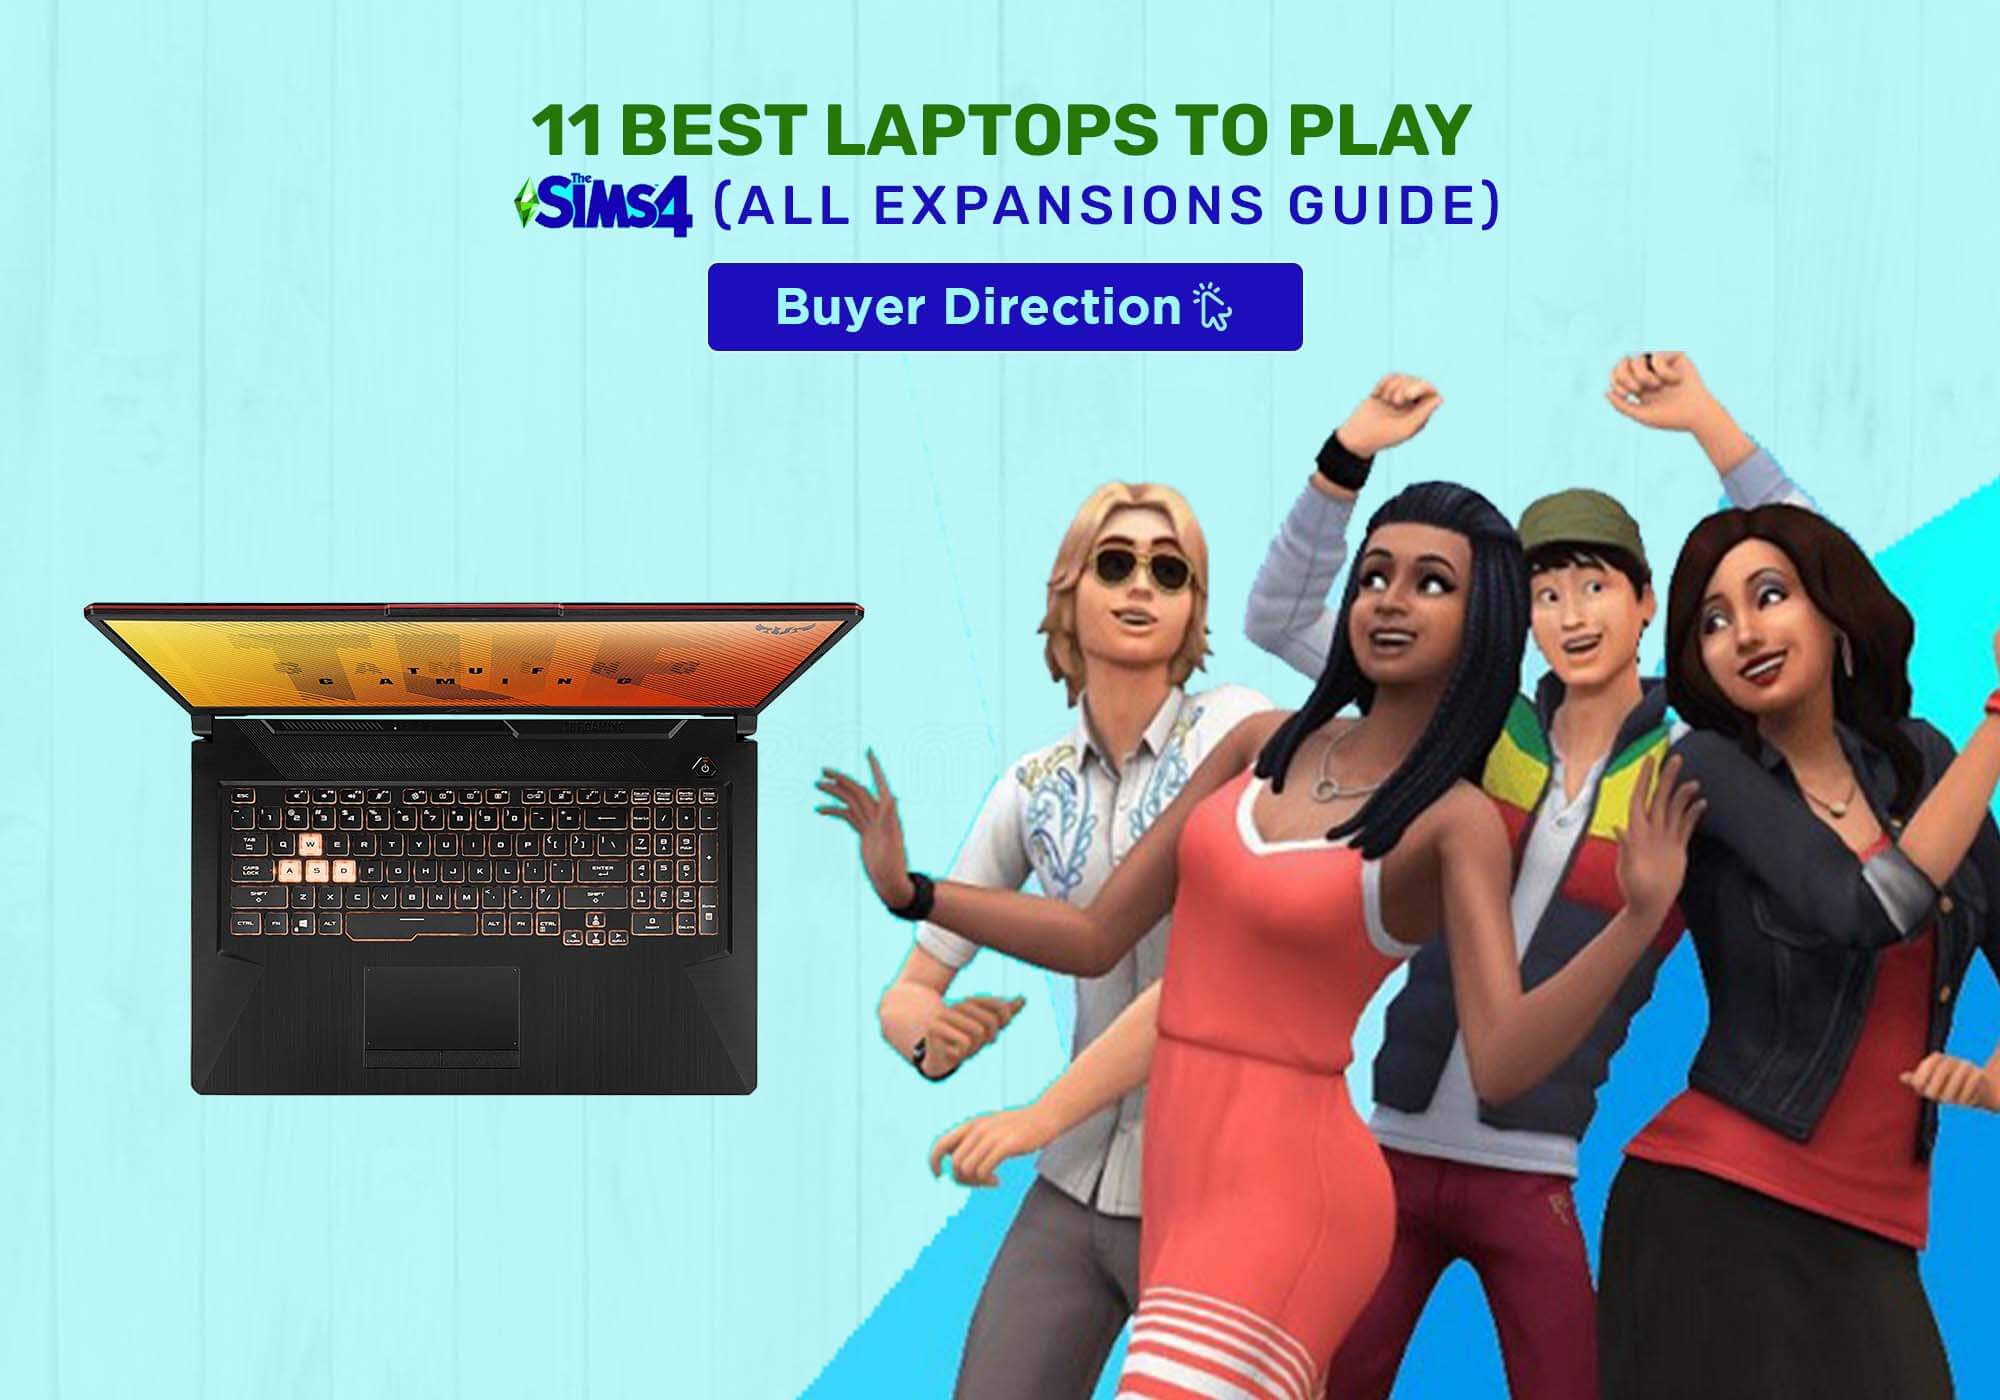 11 Best Laptops to Play Sims 4 (All Expansions Guide)